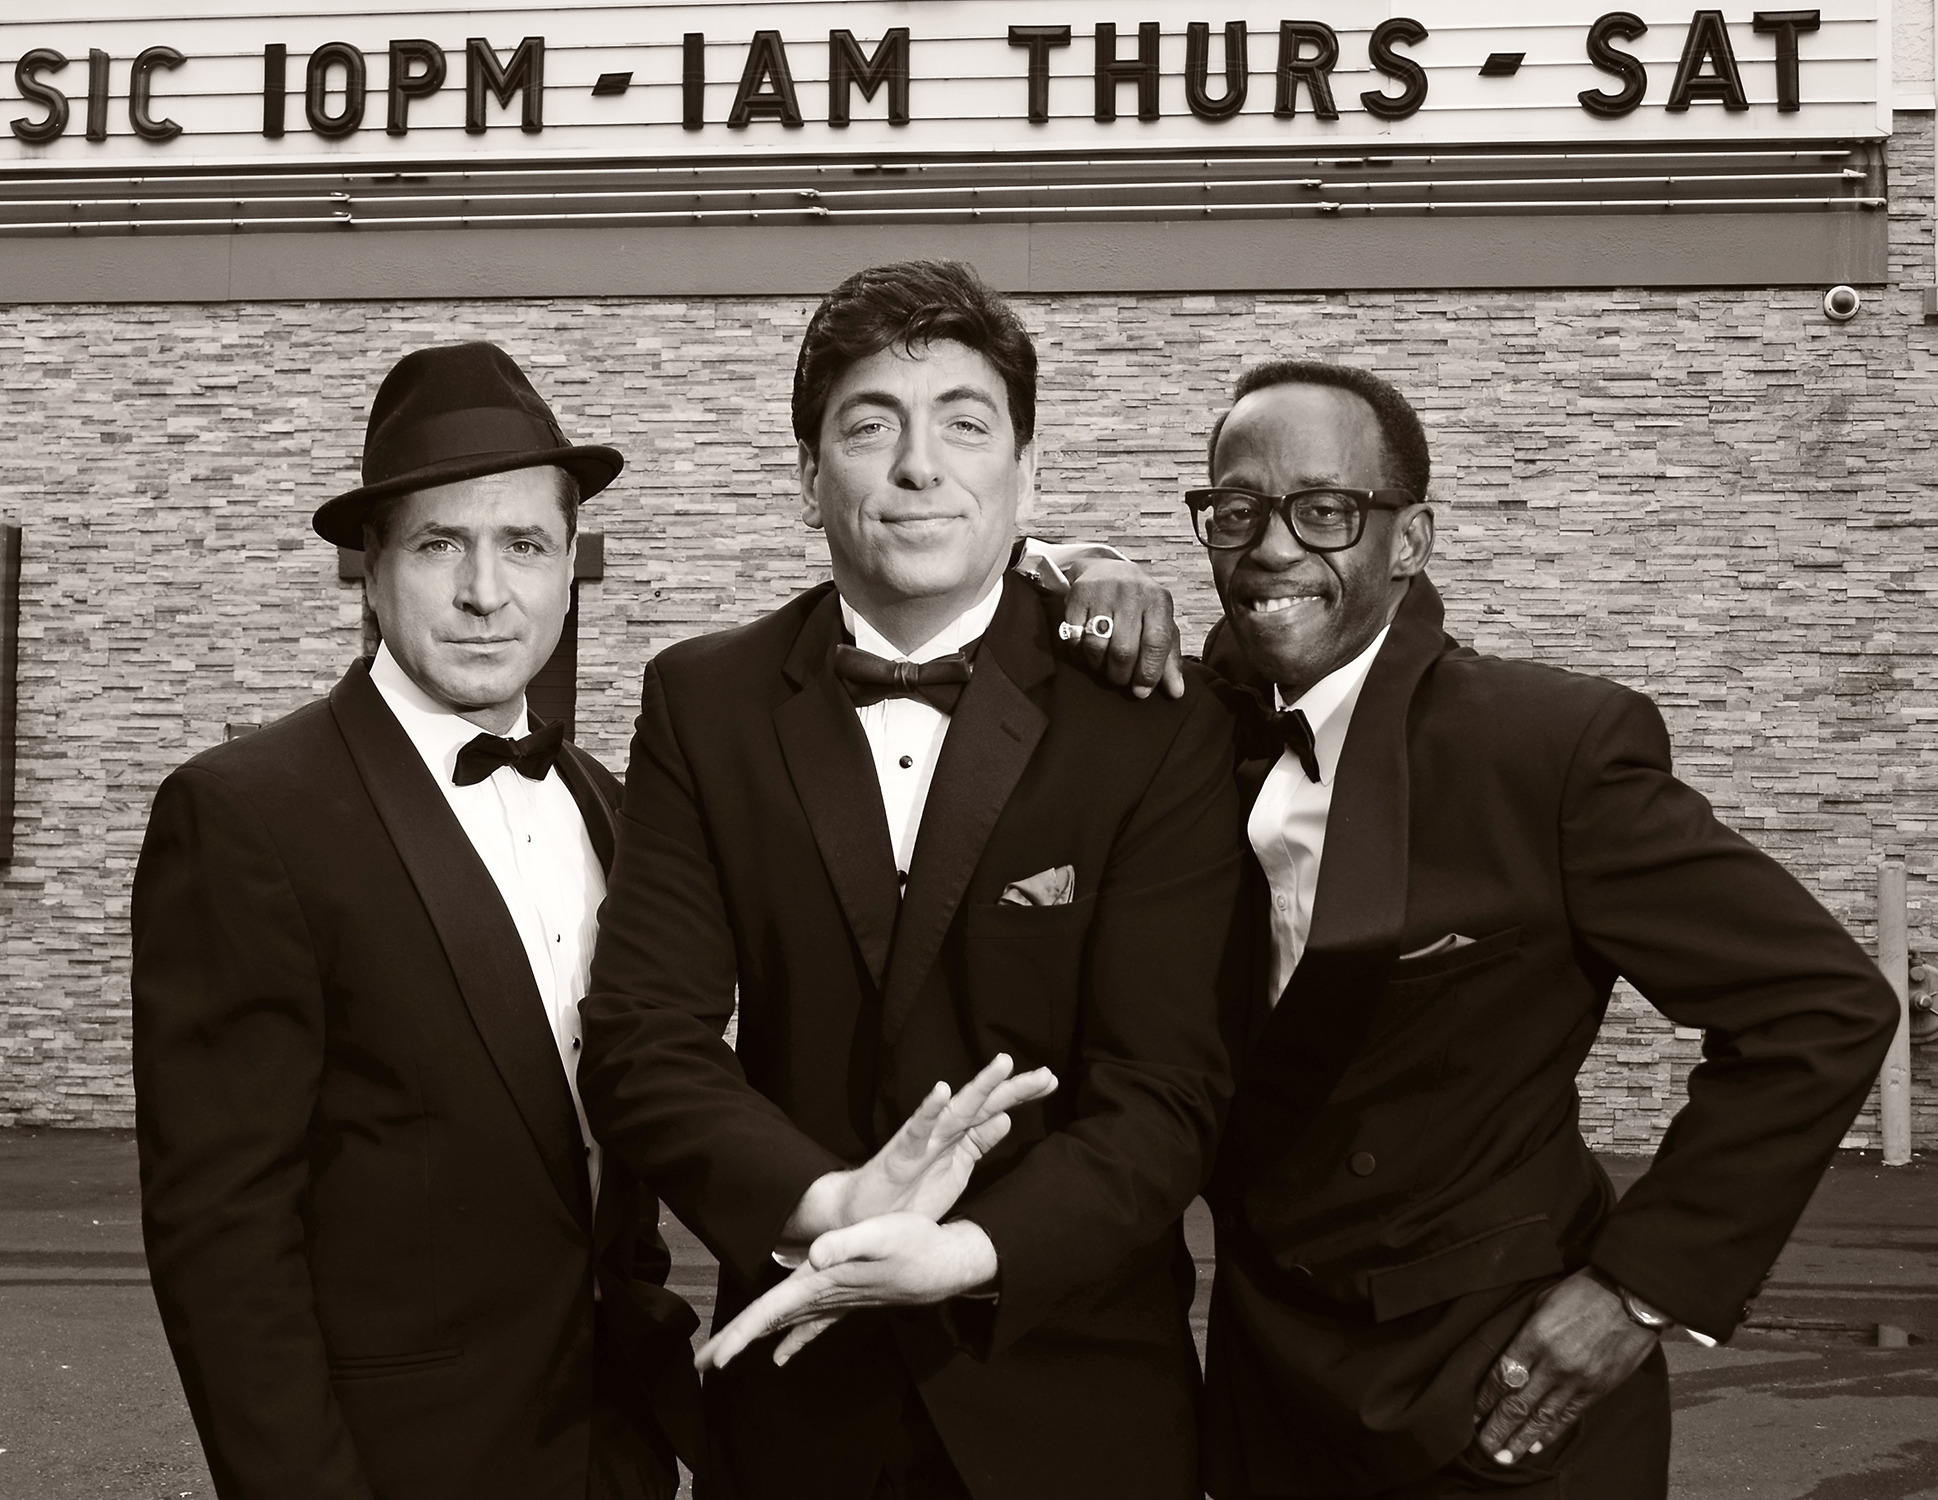 Review: Vegas Rat Pack is a showcase of true talent, hampered only by its jokes